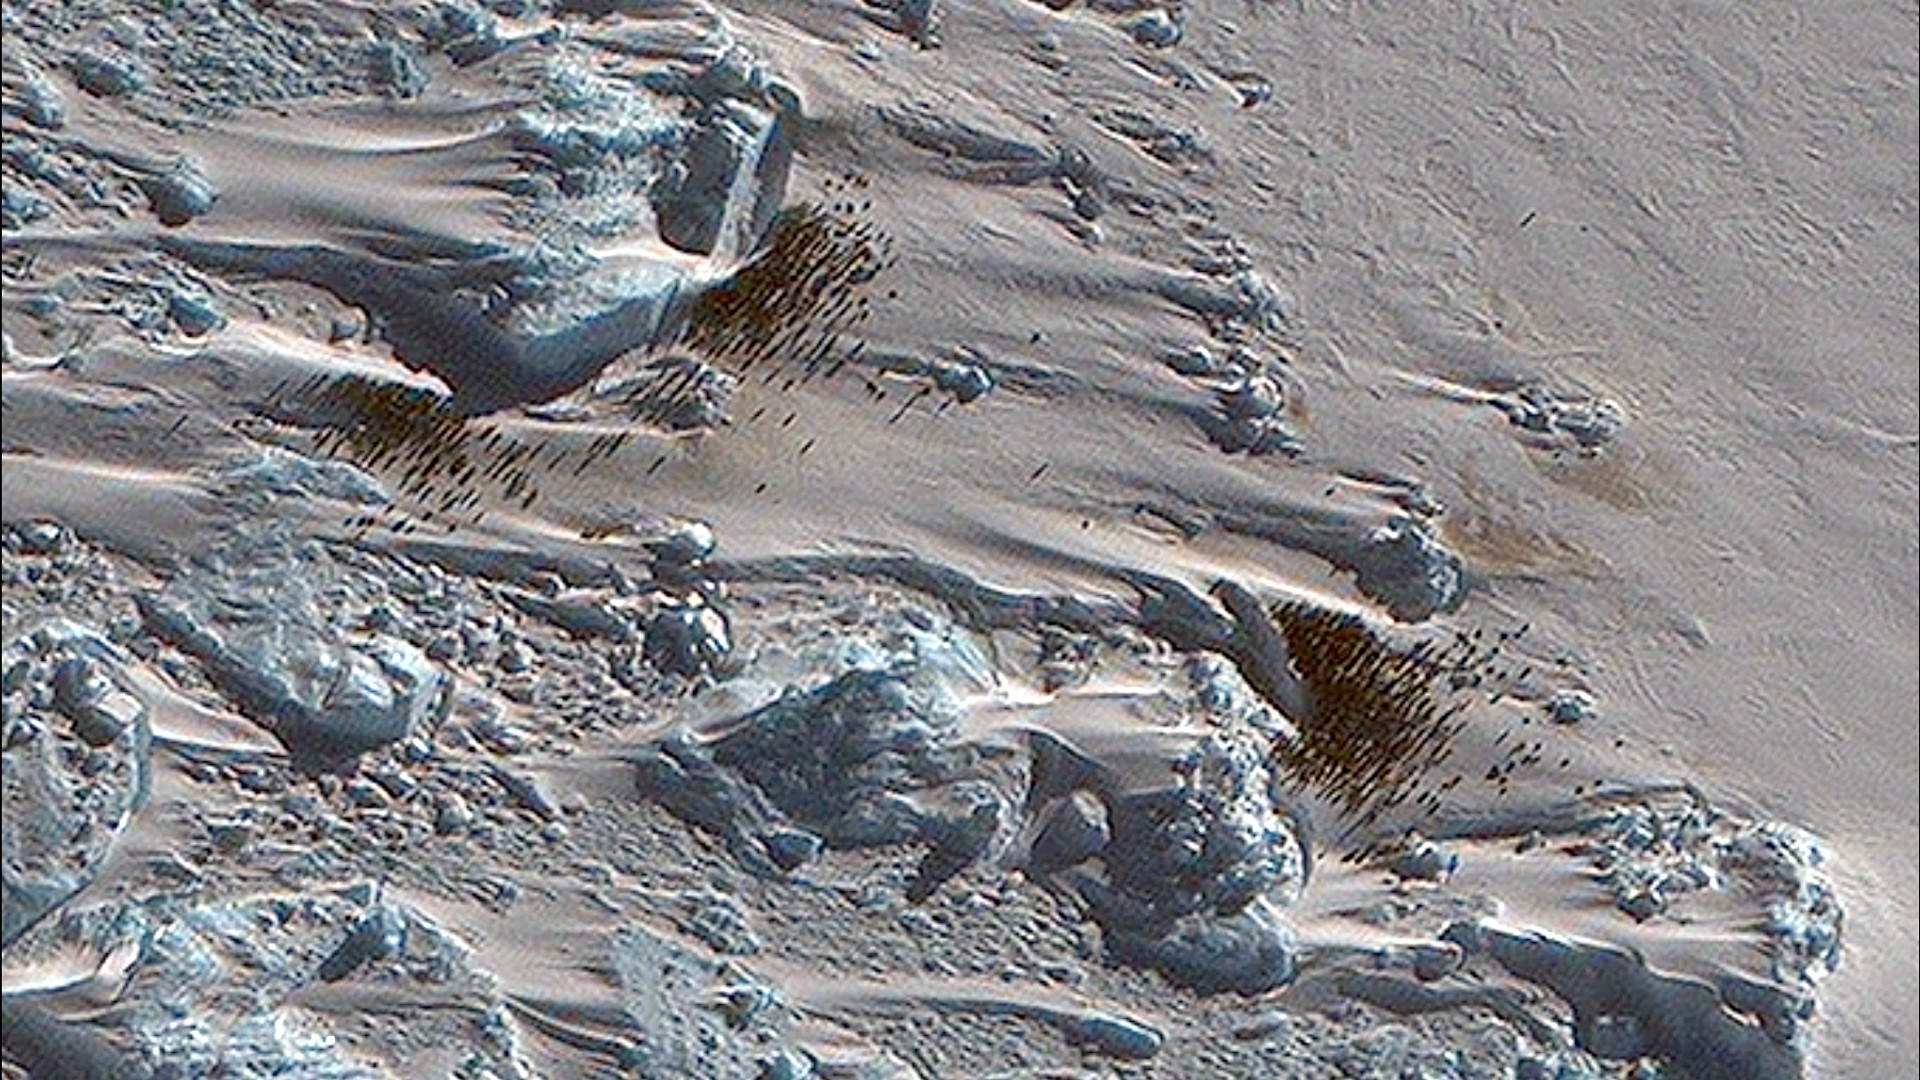 High-resolution photographs taken by the MAZAR WorldView3 satellite in October show the previously unknown penguin colony on the sea ice. The guano stains and even individual penguins are now visible.